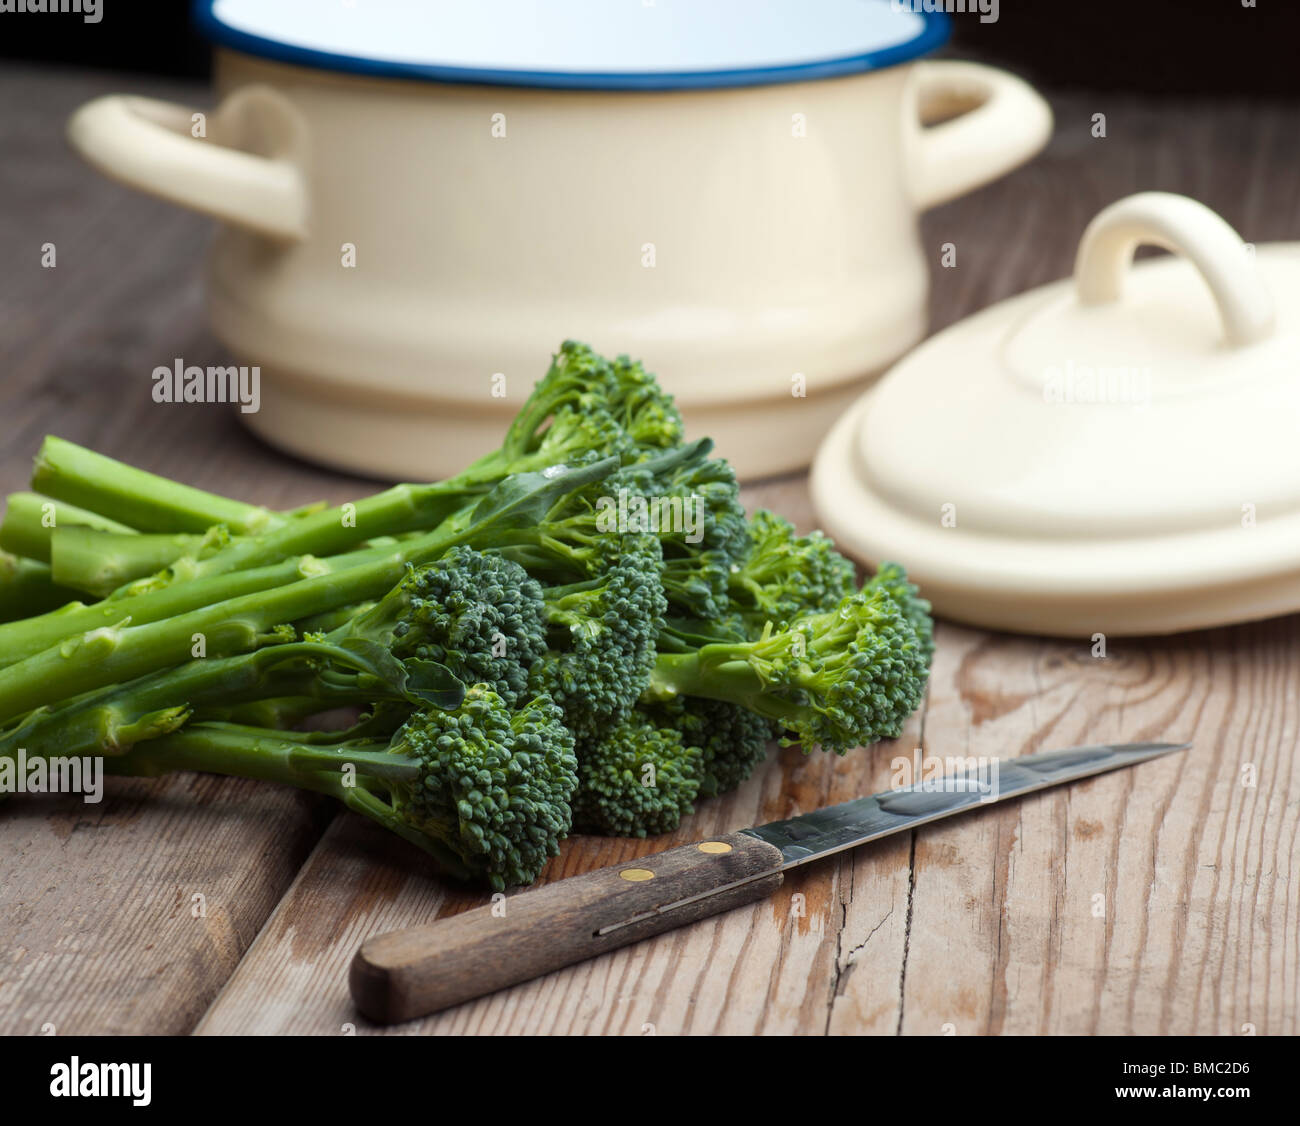 Fresh Broccoli Laid On A Wooden Kitchen Table With A Vegetable Knife and A Pan With Lid In The Background Stock Photo